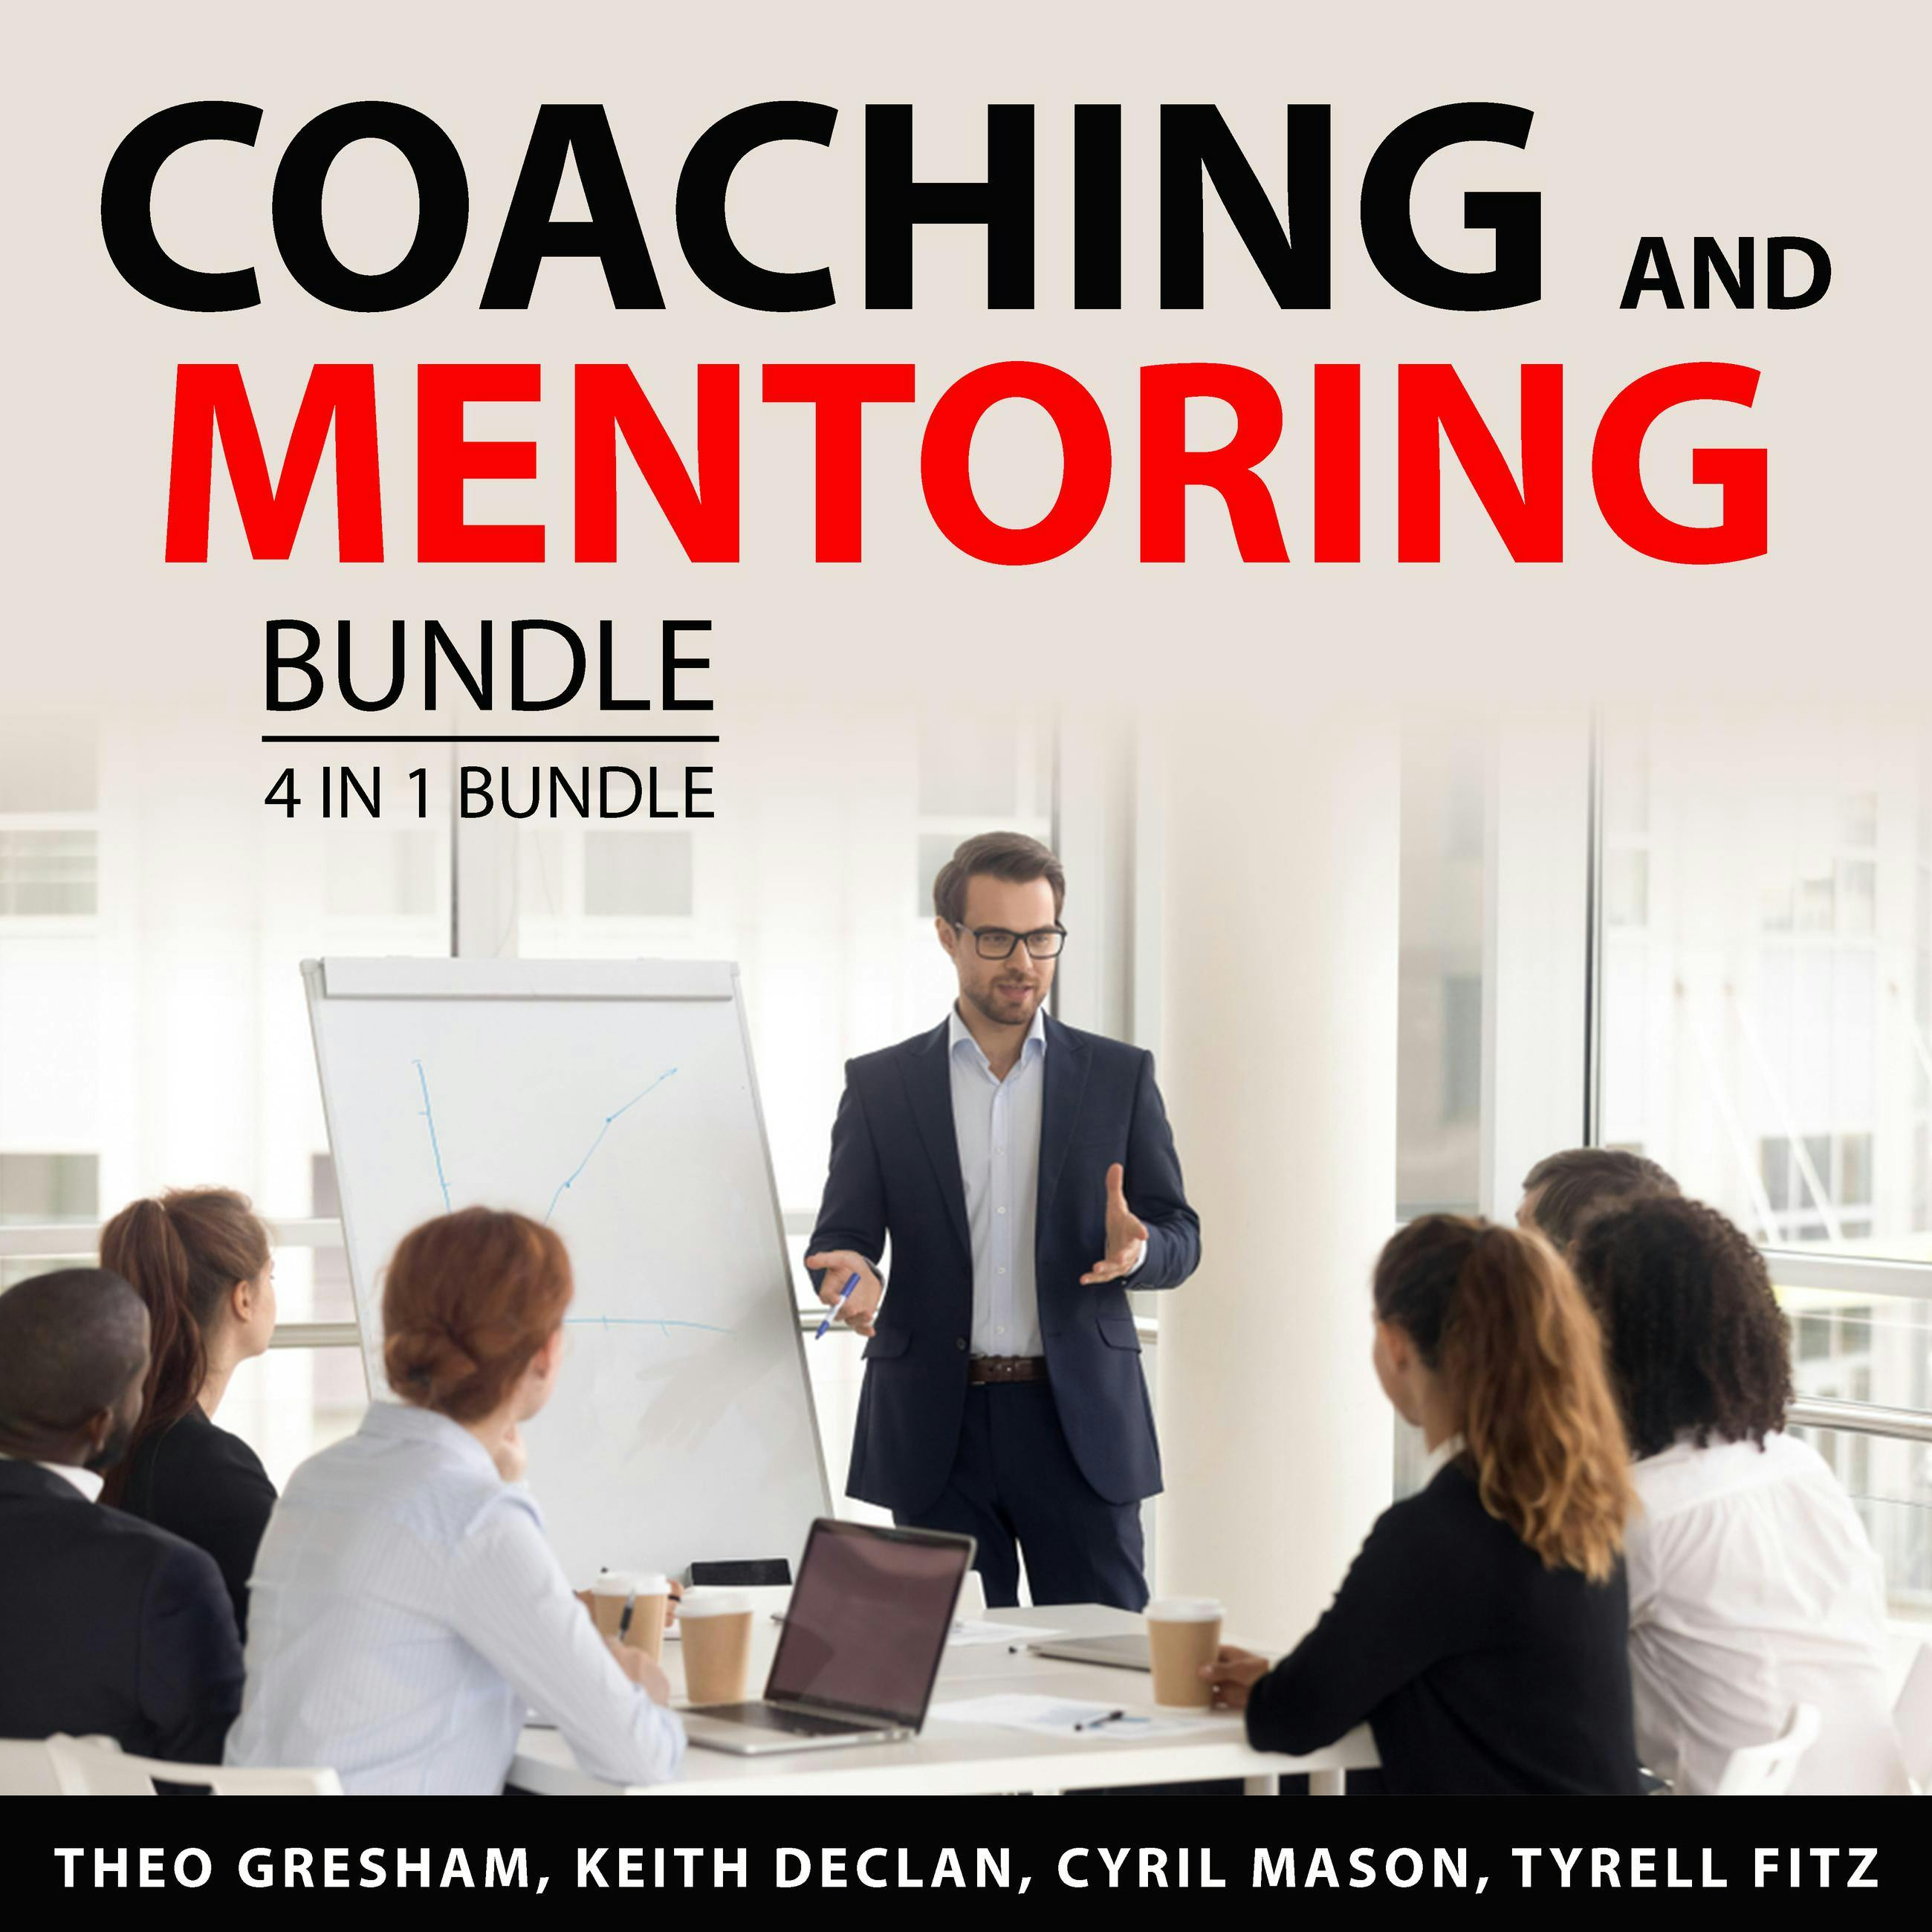 Coaching and Mentoring Bundle, 4 and 1 Bundle: Prosperous Coaching, Online Coaching Career, Coaching Wizardy, and Coaching Business Principles - undefined